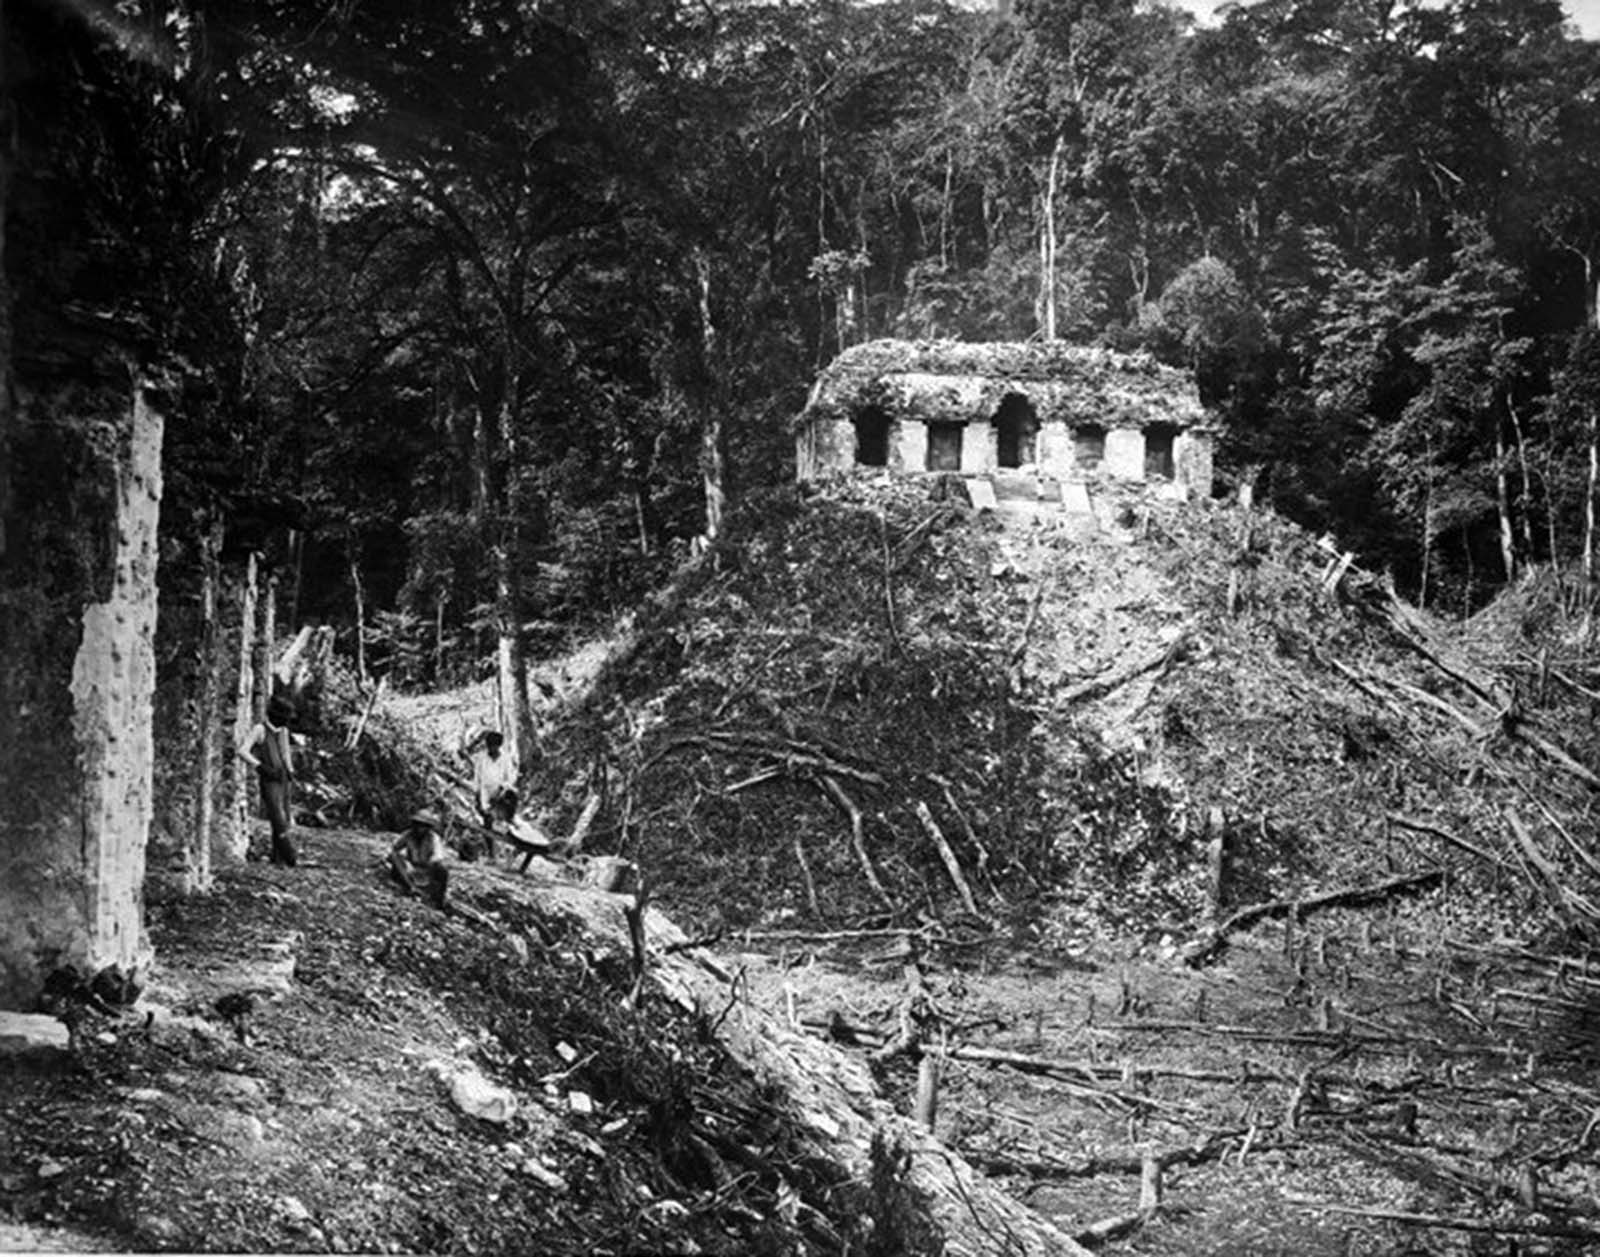 Vintage photos documenting the discovery of Maya ruins, 1880-1900 - Rare Historical Photos